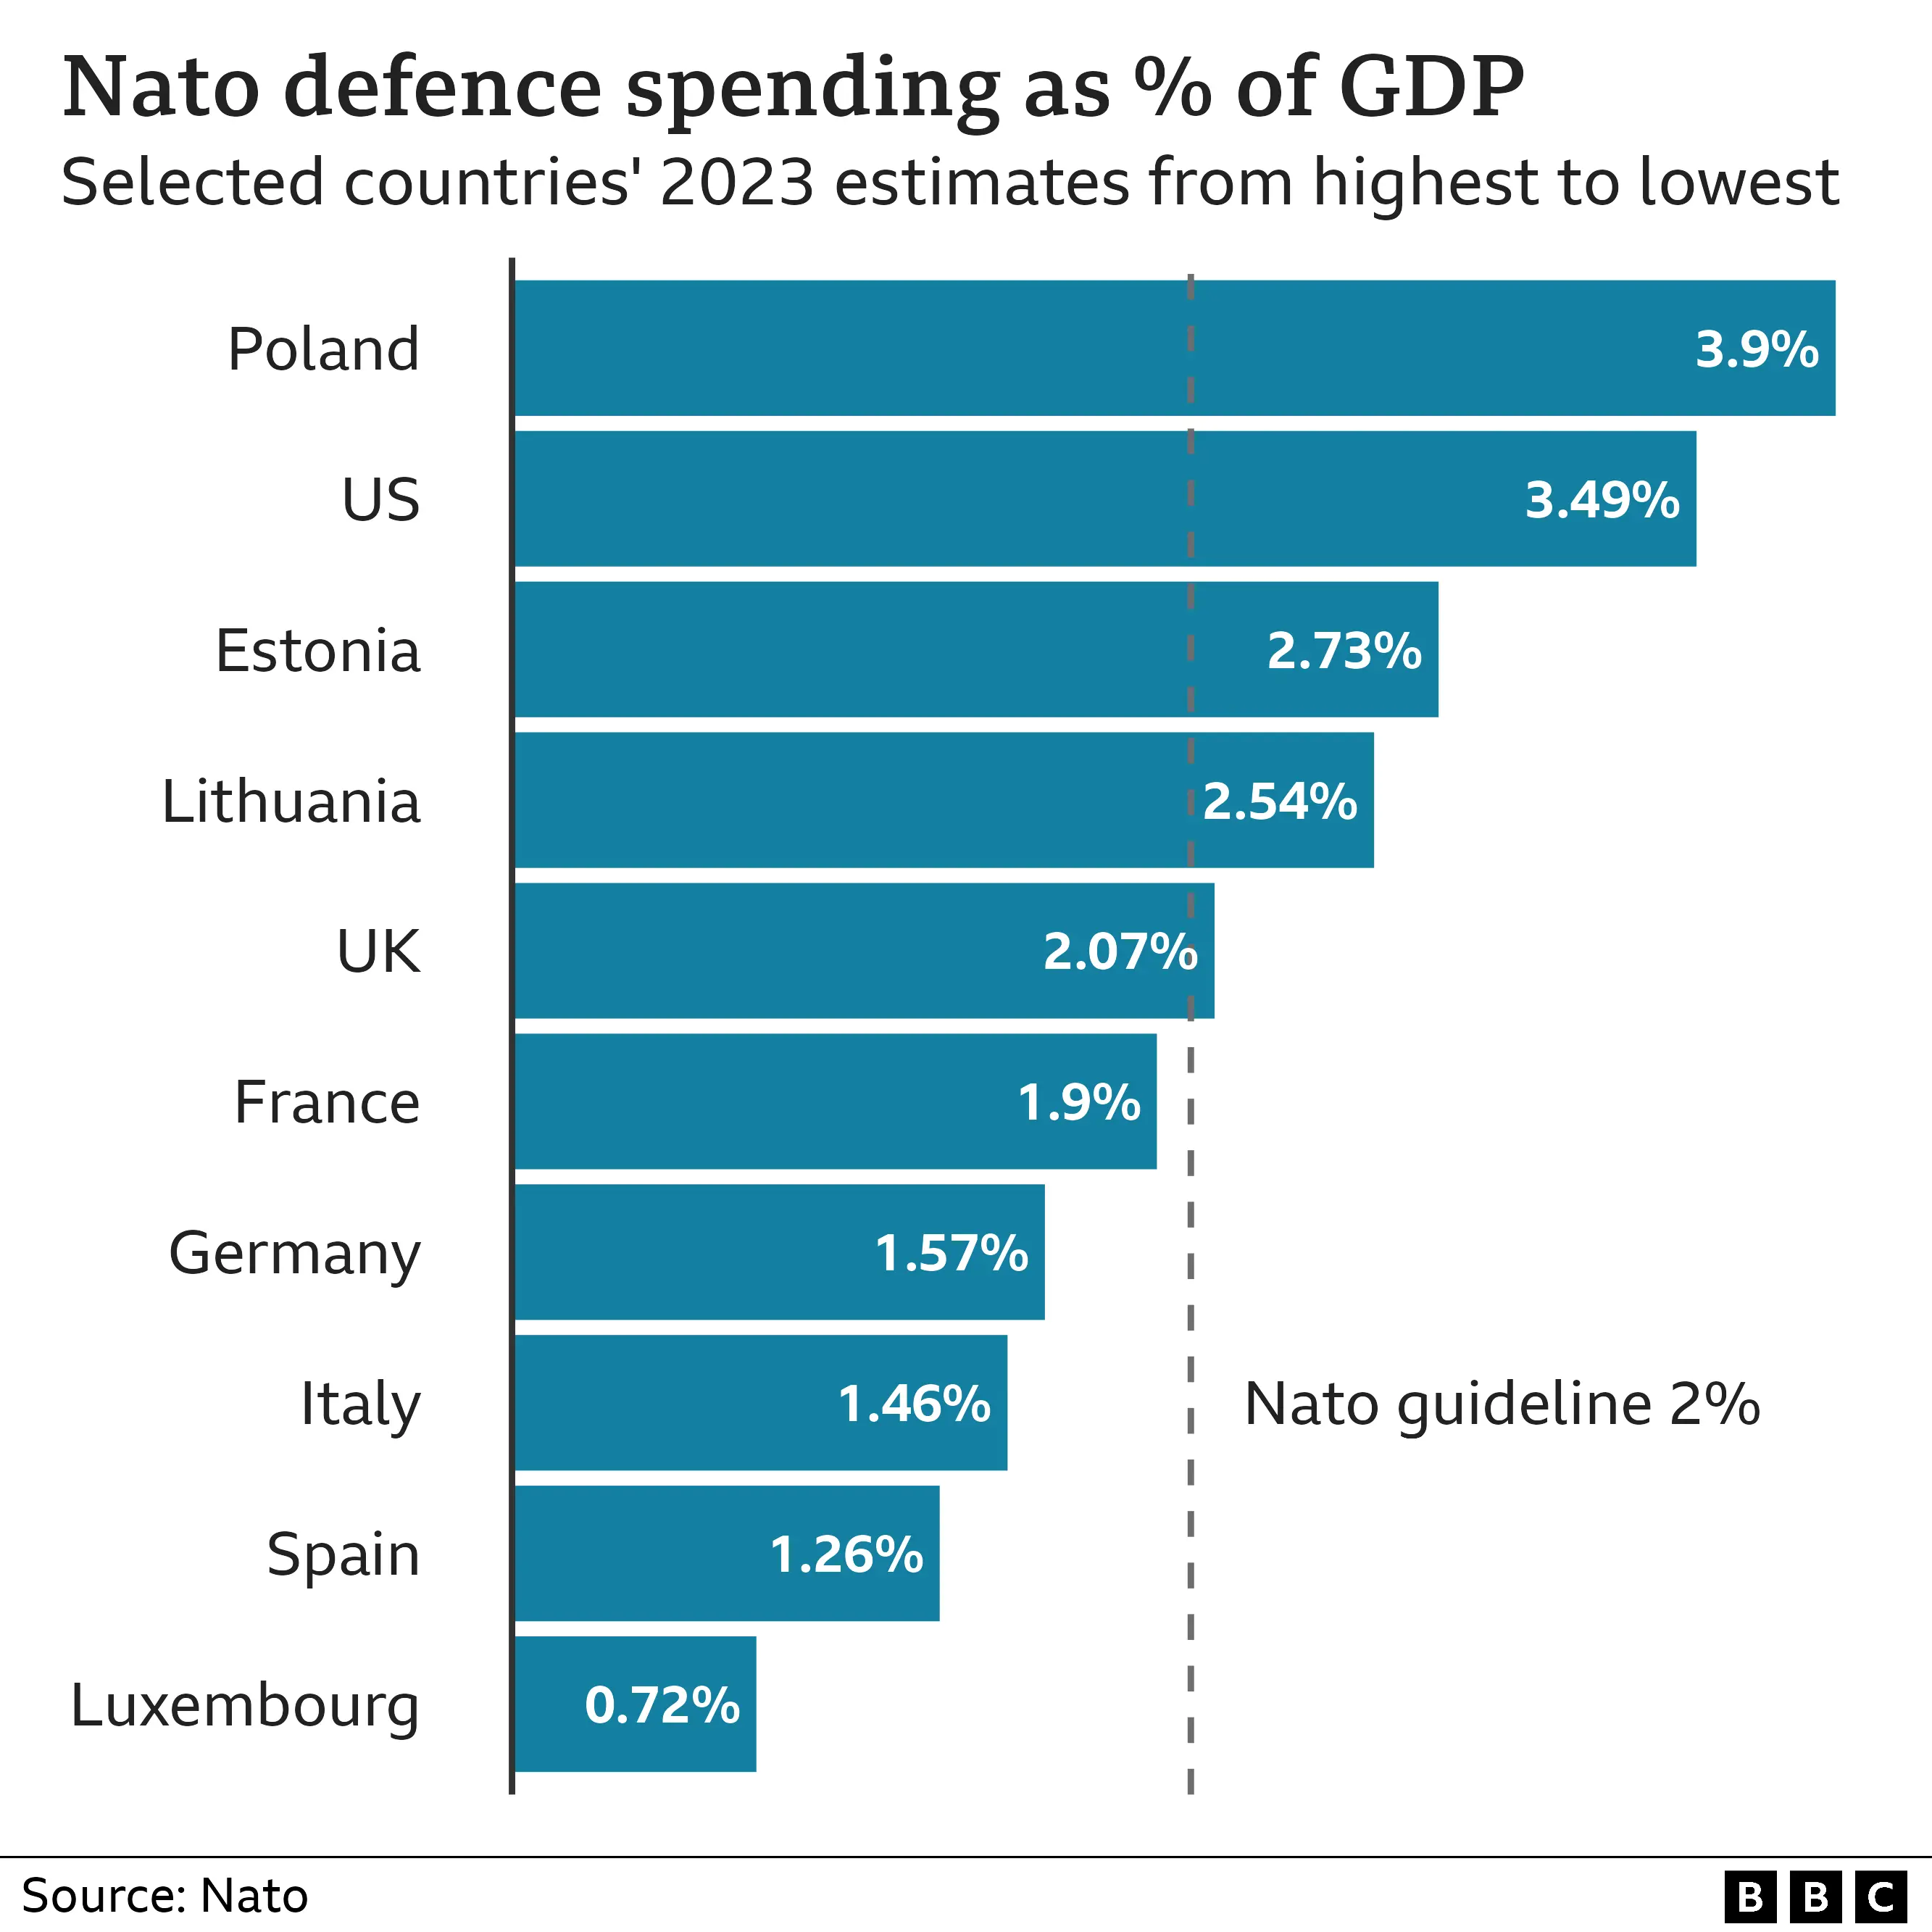 Graphic showing Nato defence spending as a % of GDP (added July 2023) eiddiqeziqrqinv